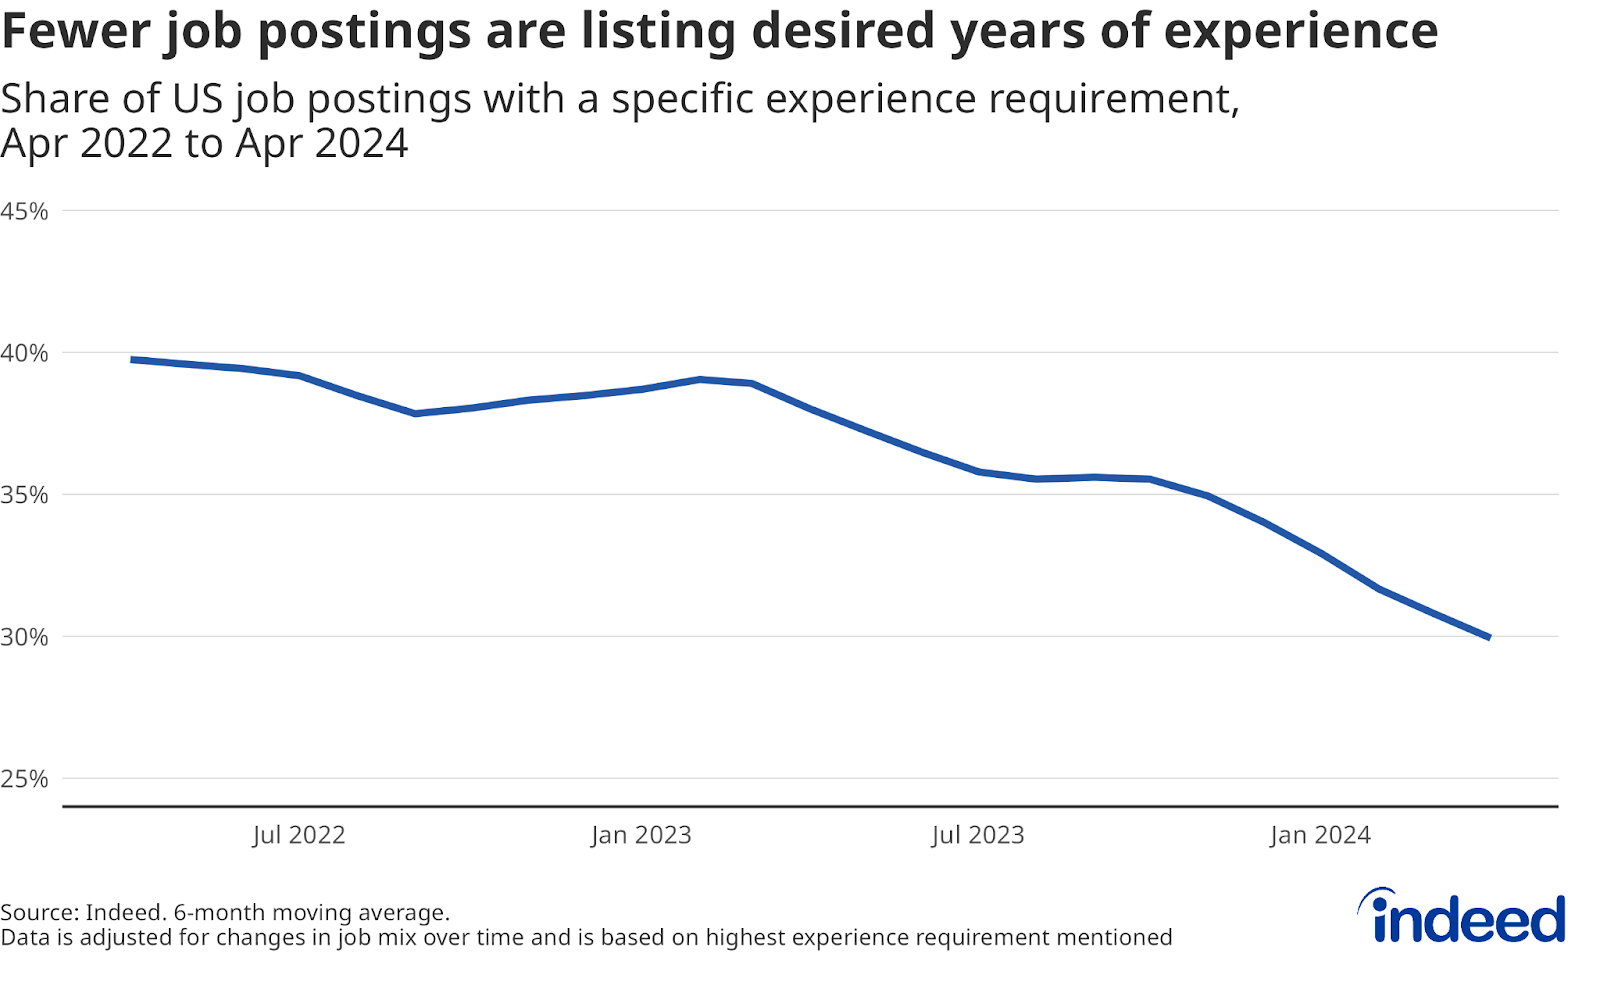 A line graph titled “Fewer job postings are listing desired years of experience” shows the share of US job postings that contain a year-specific experience requirement. The share has declined from about 40% in April 2022 to 30% in April 2024.